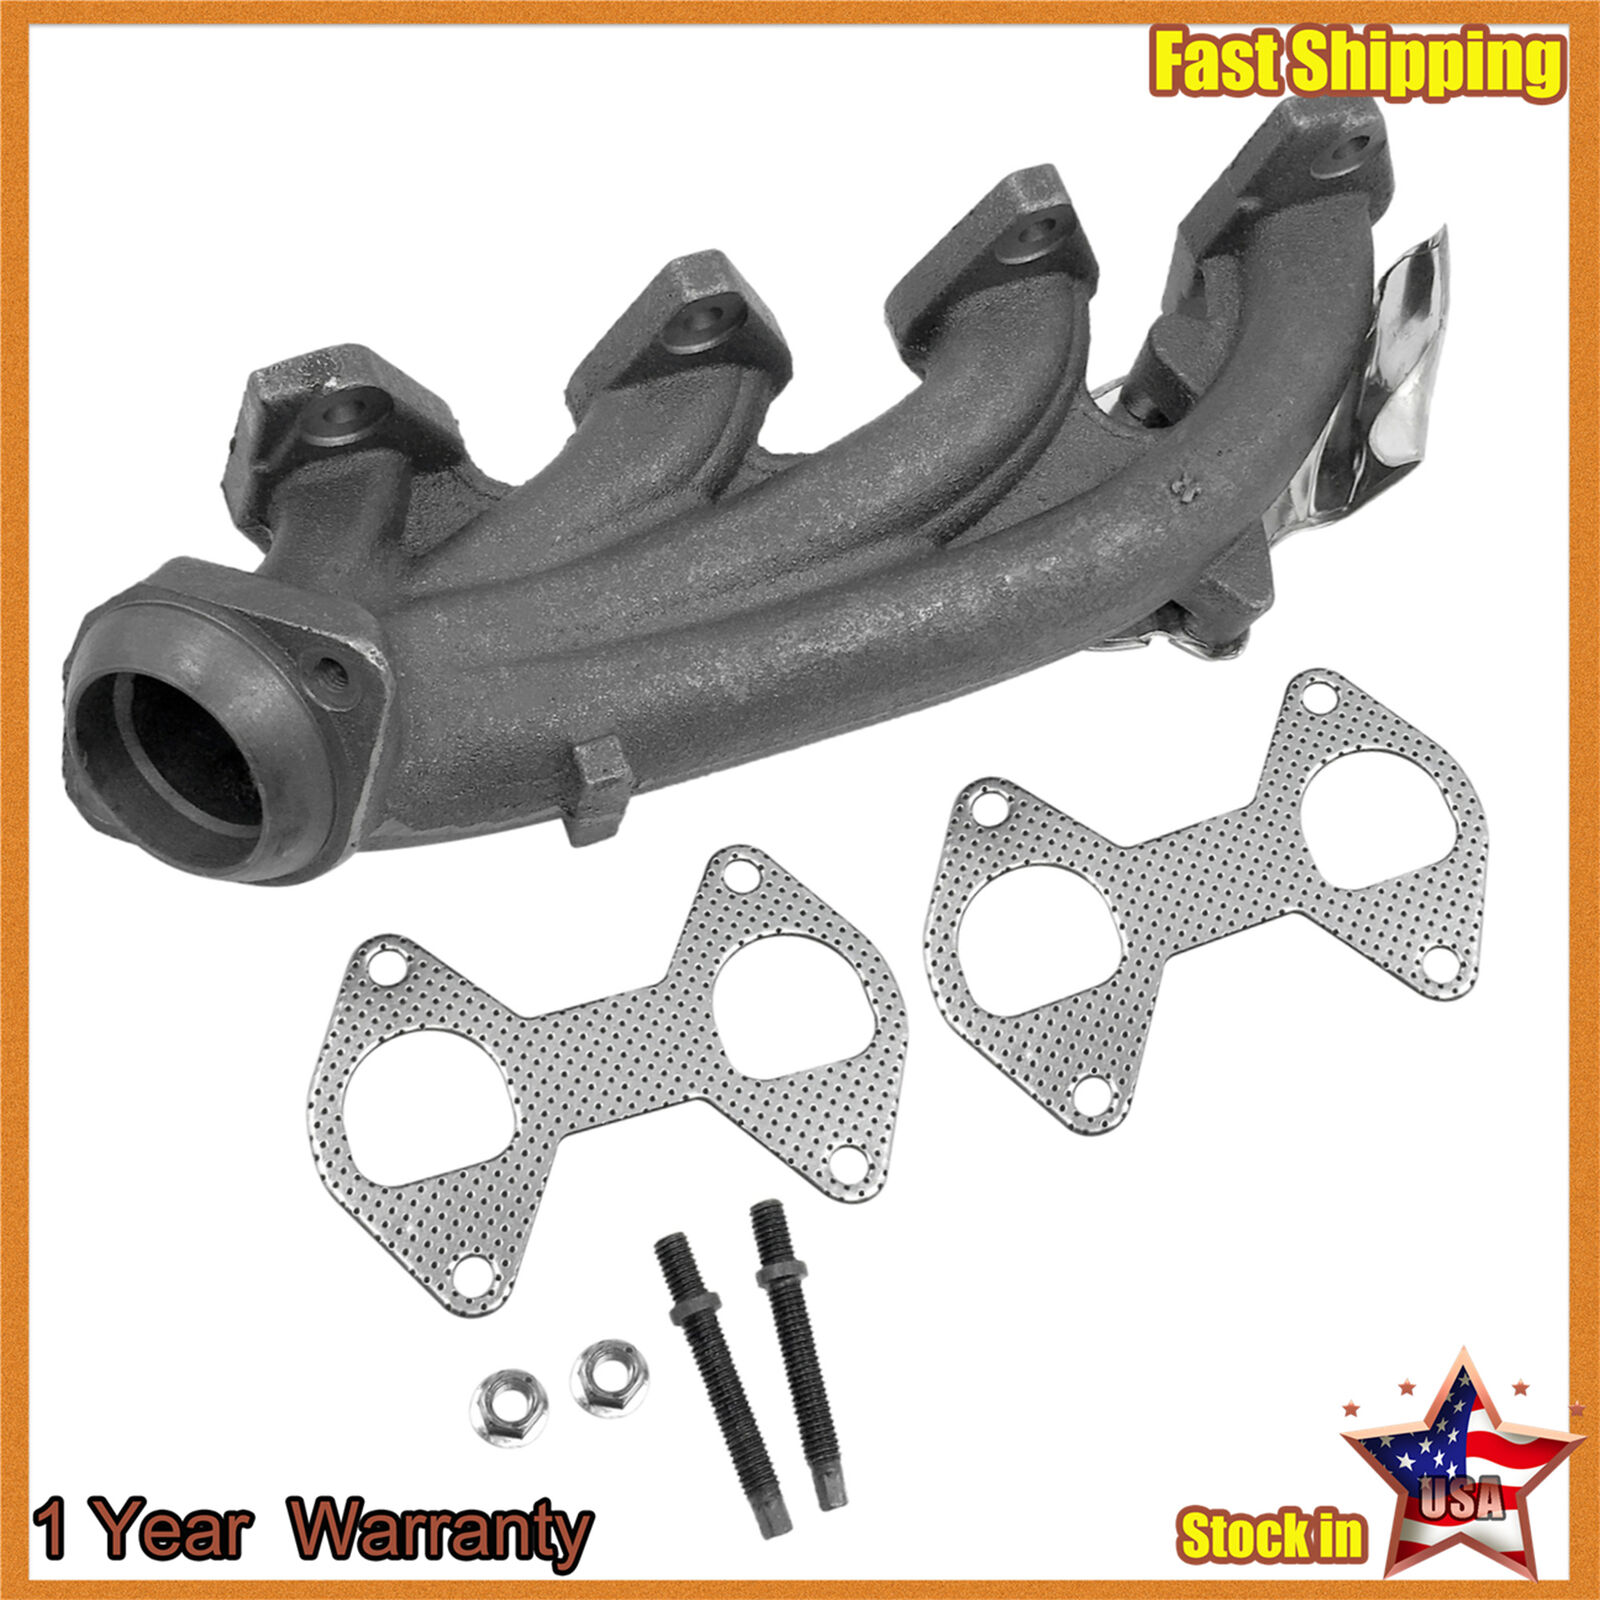 Exhaust Manifold Left Fit 2005-2010 Ford F-250 F-350 Super Duty F-350 674-696